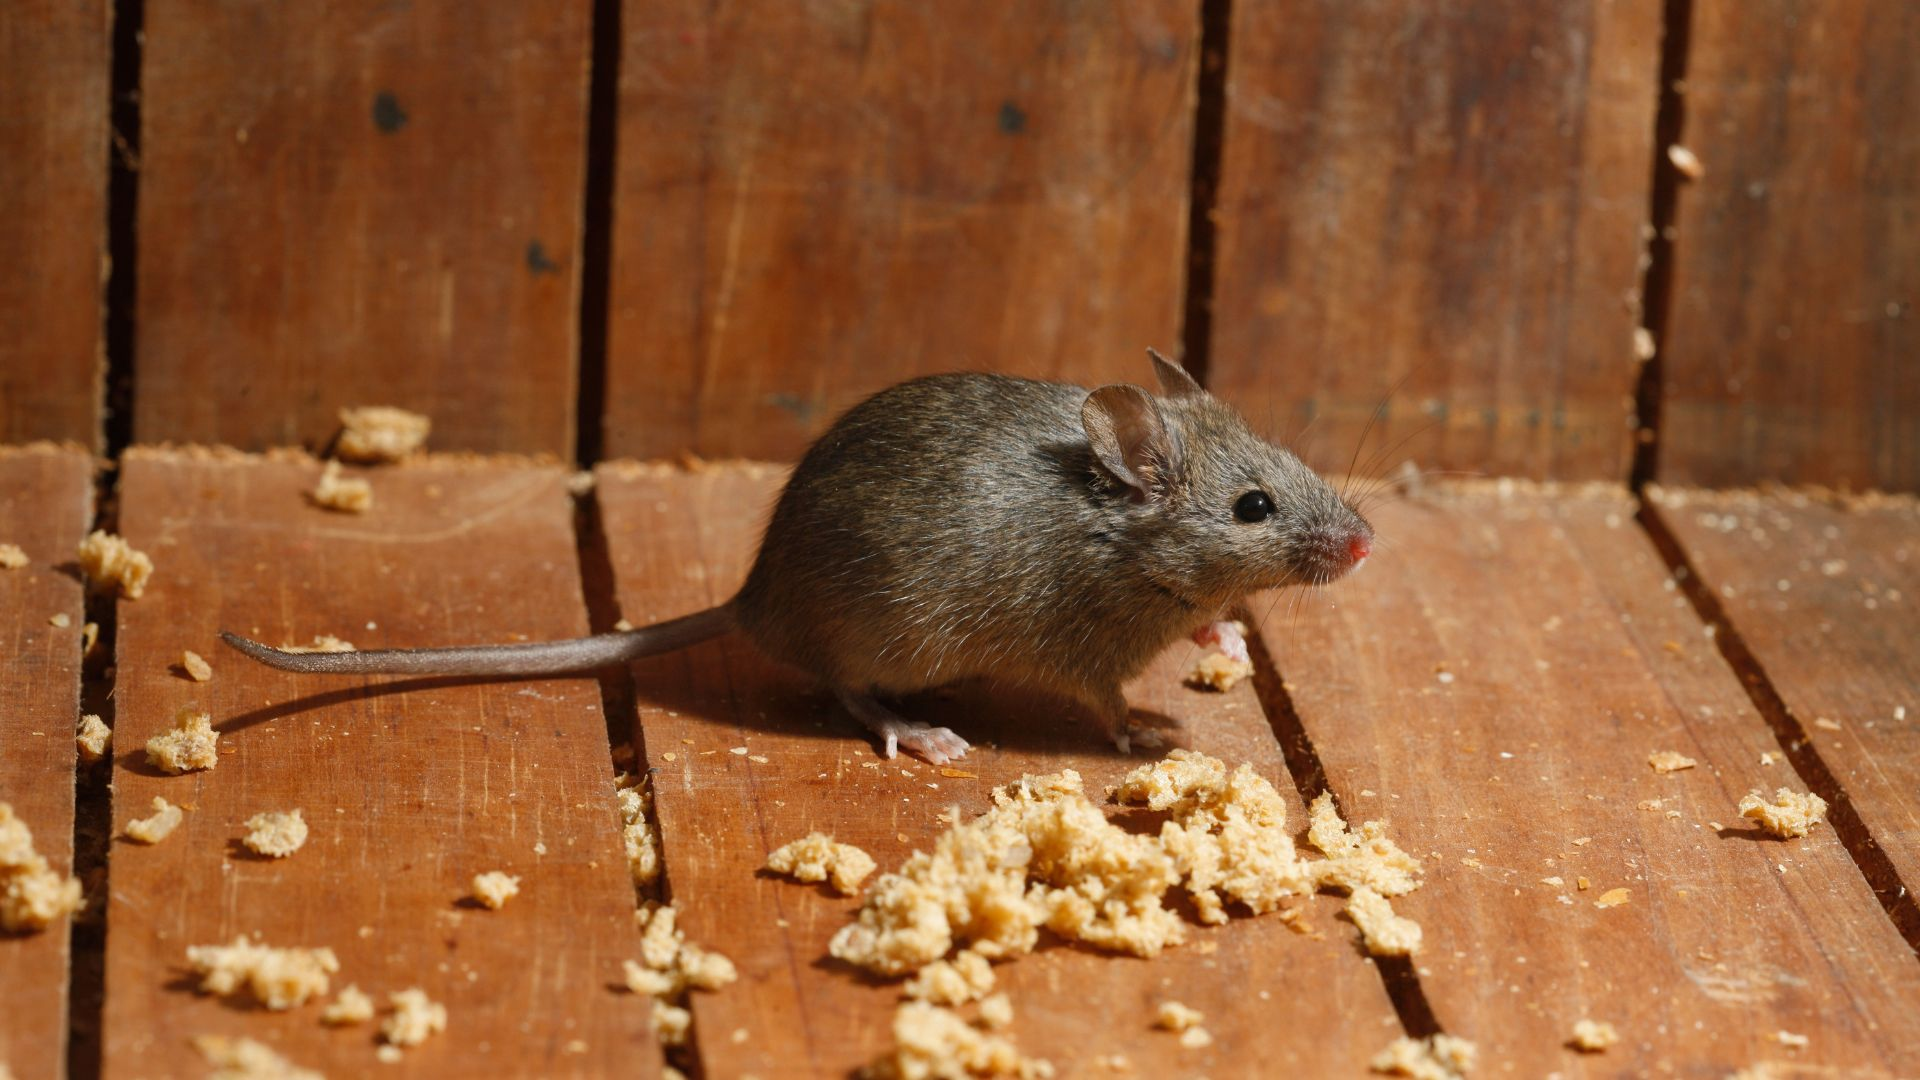 An image of a mouse making a nest inside of a wall or ceiling.